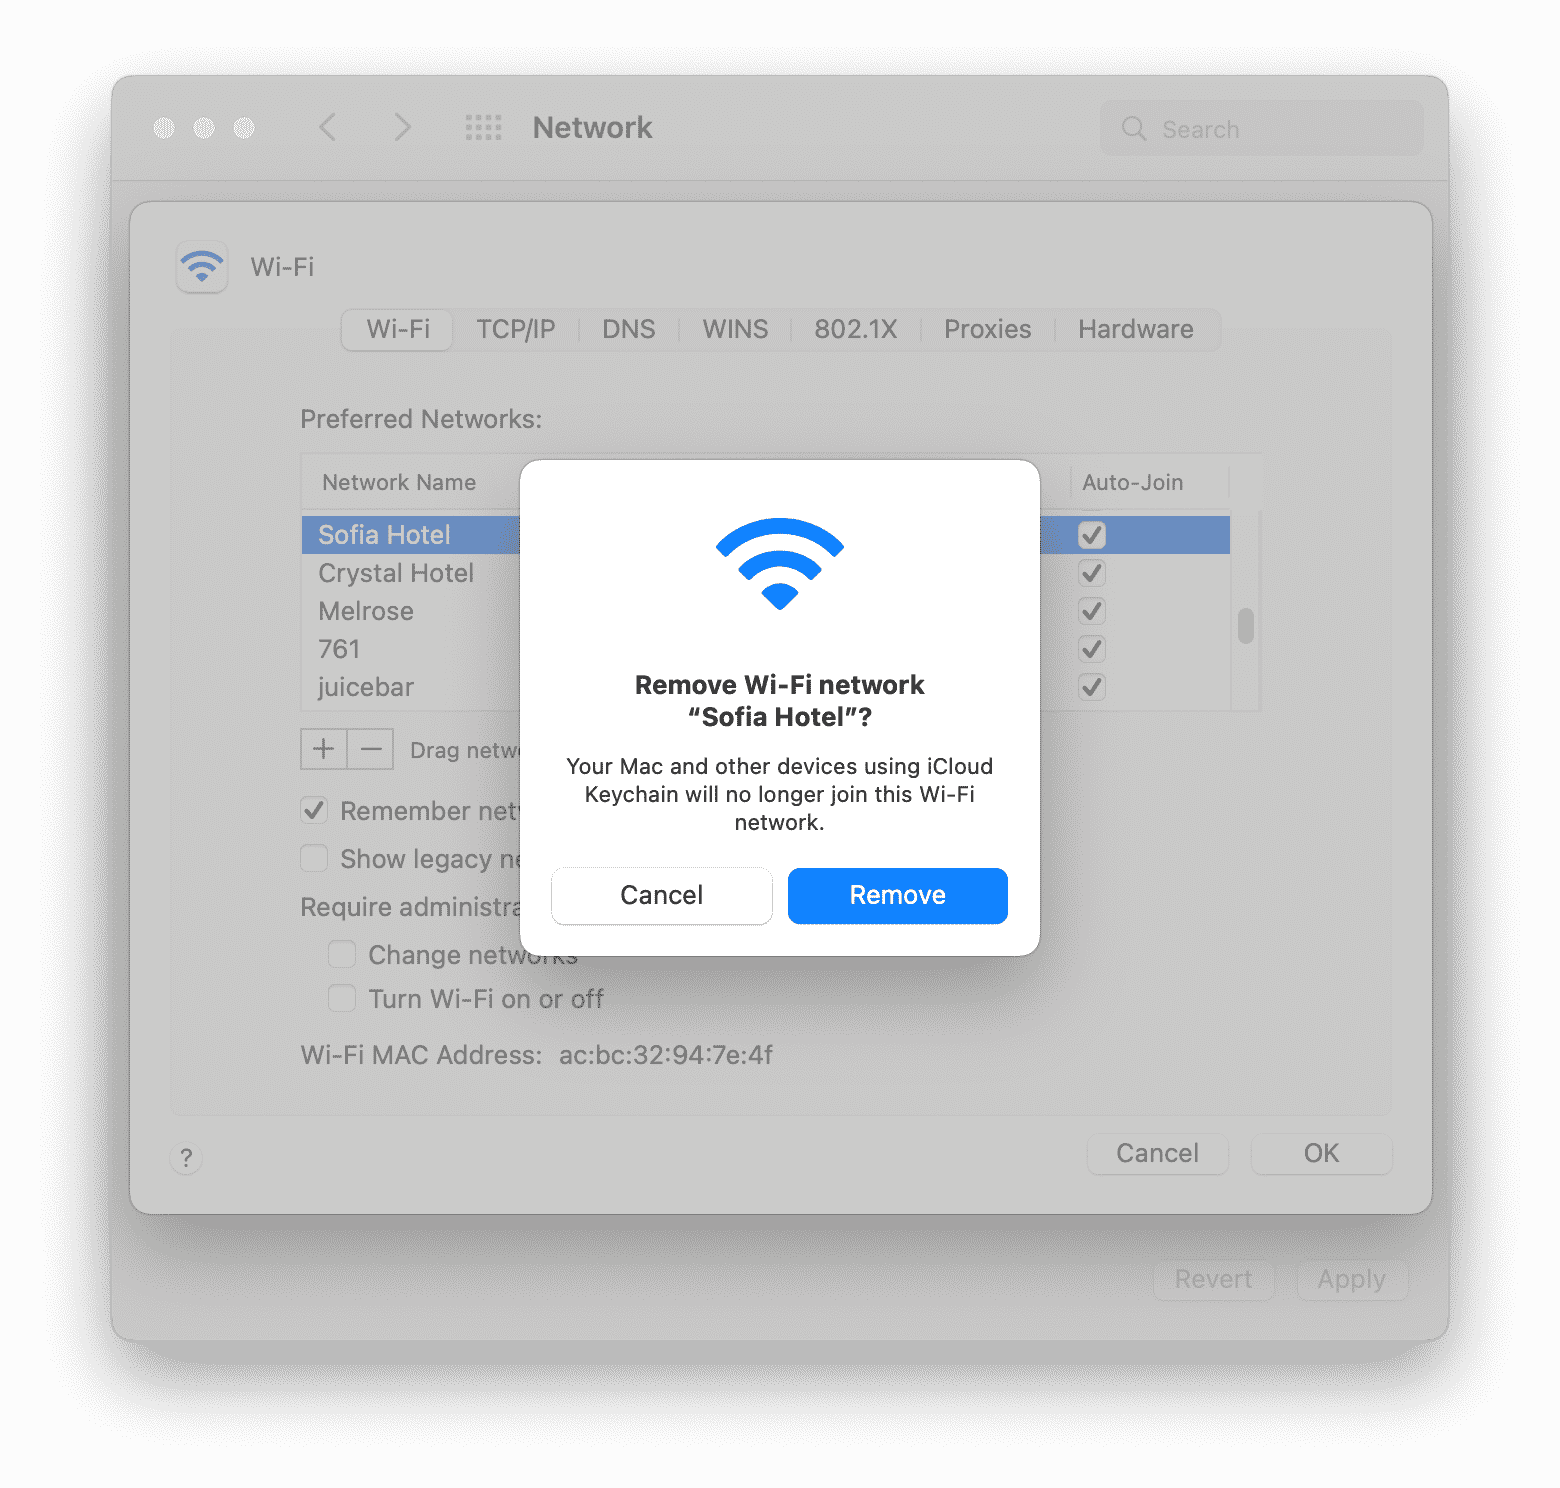 conformation messages to forget network on a Mac